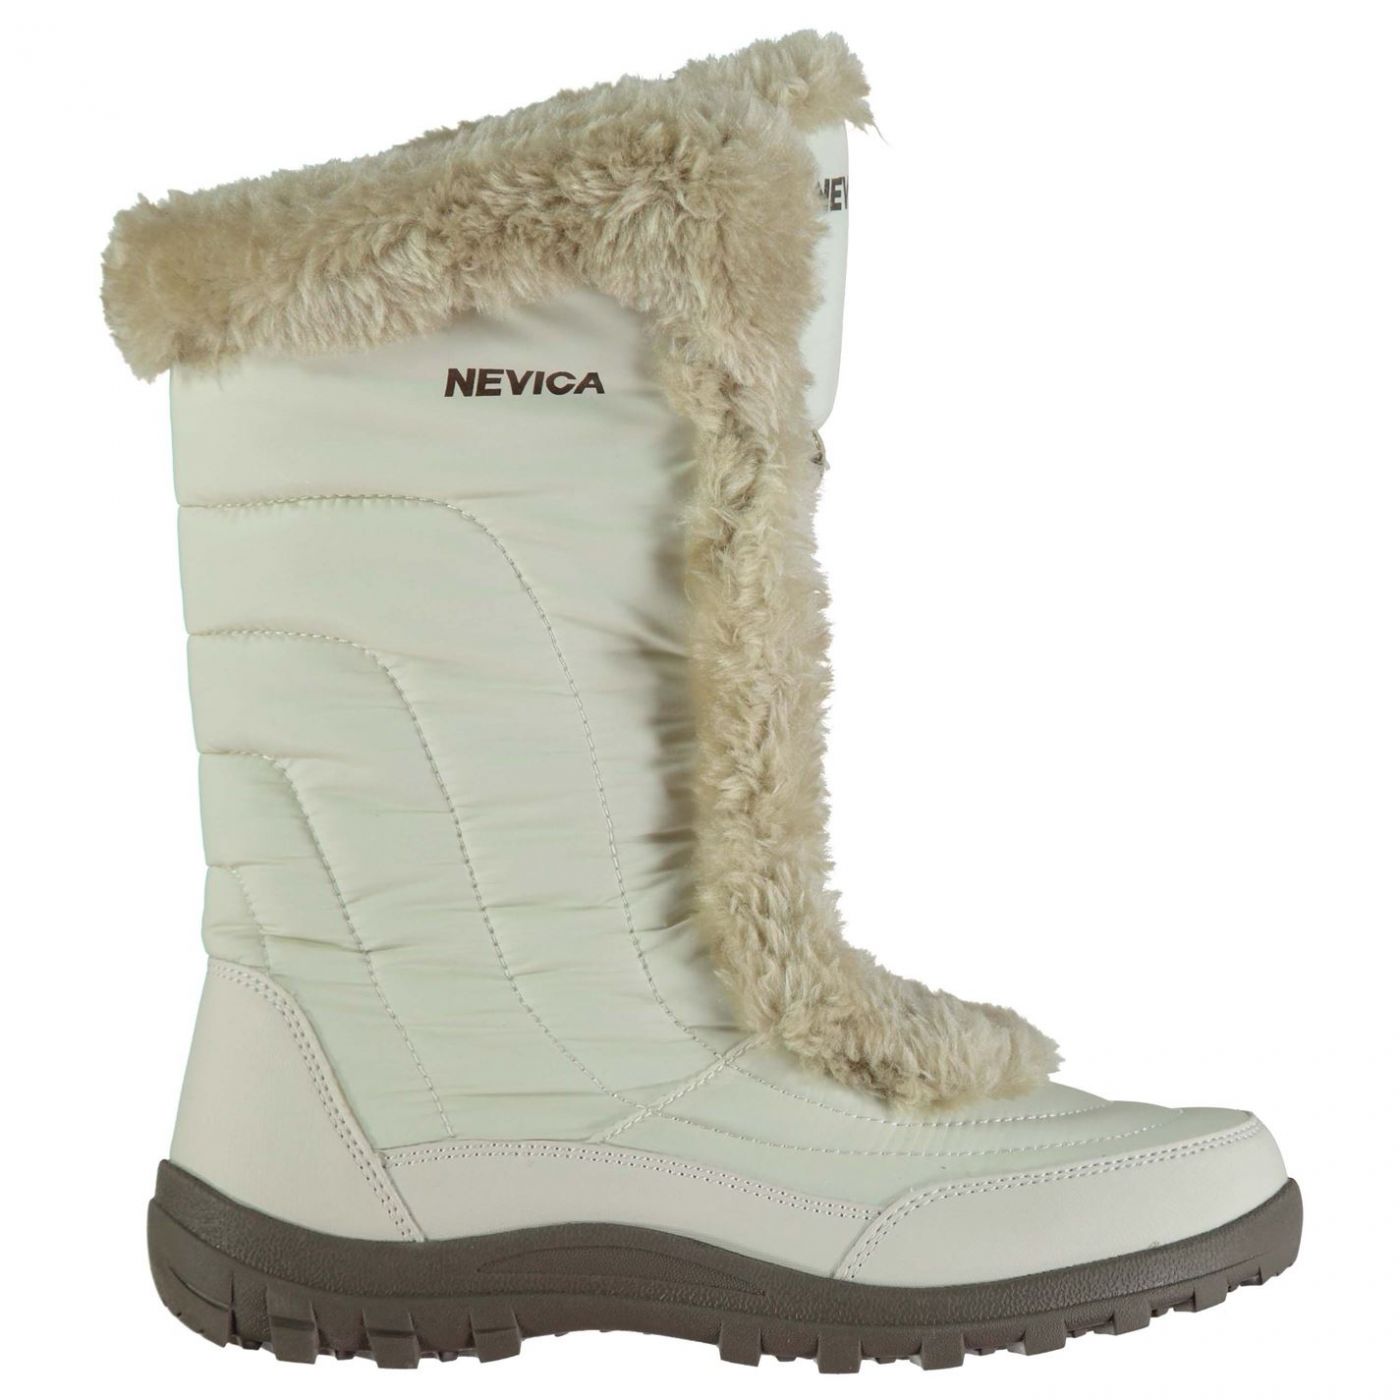 nevica snow boots